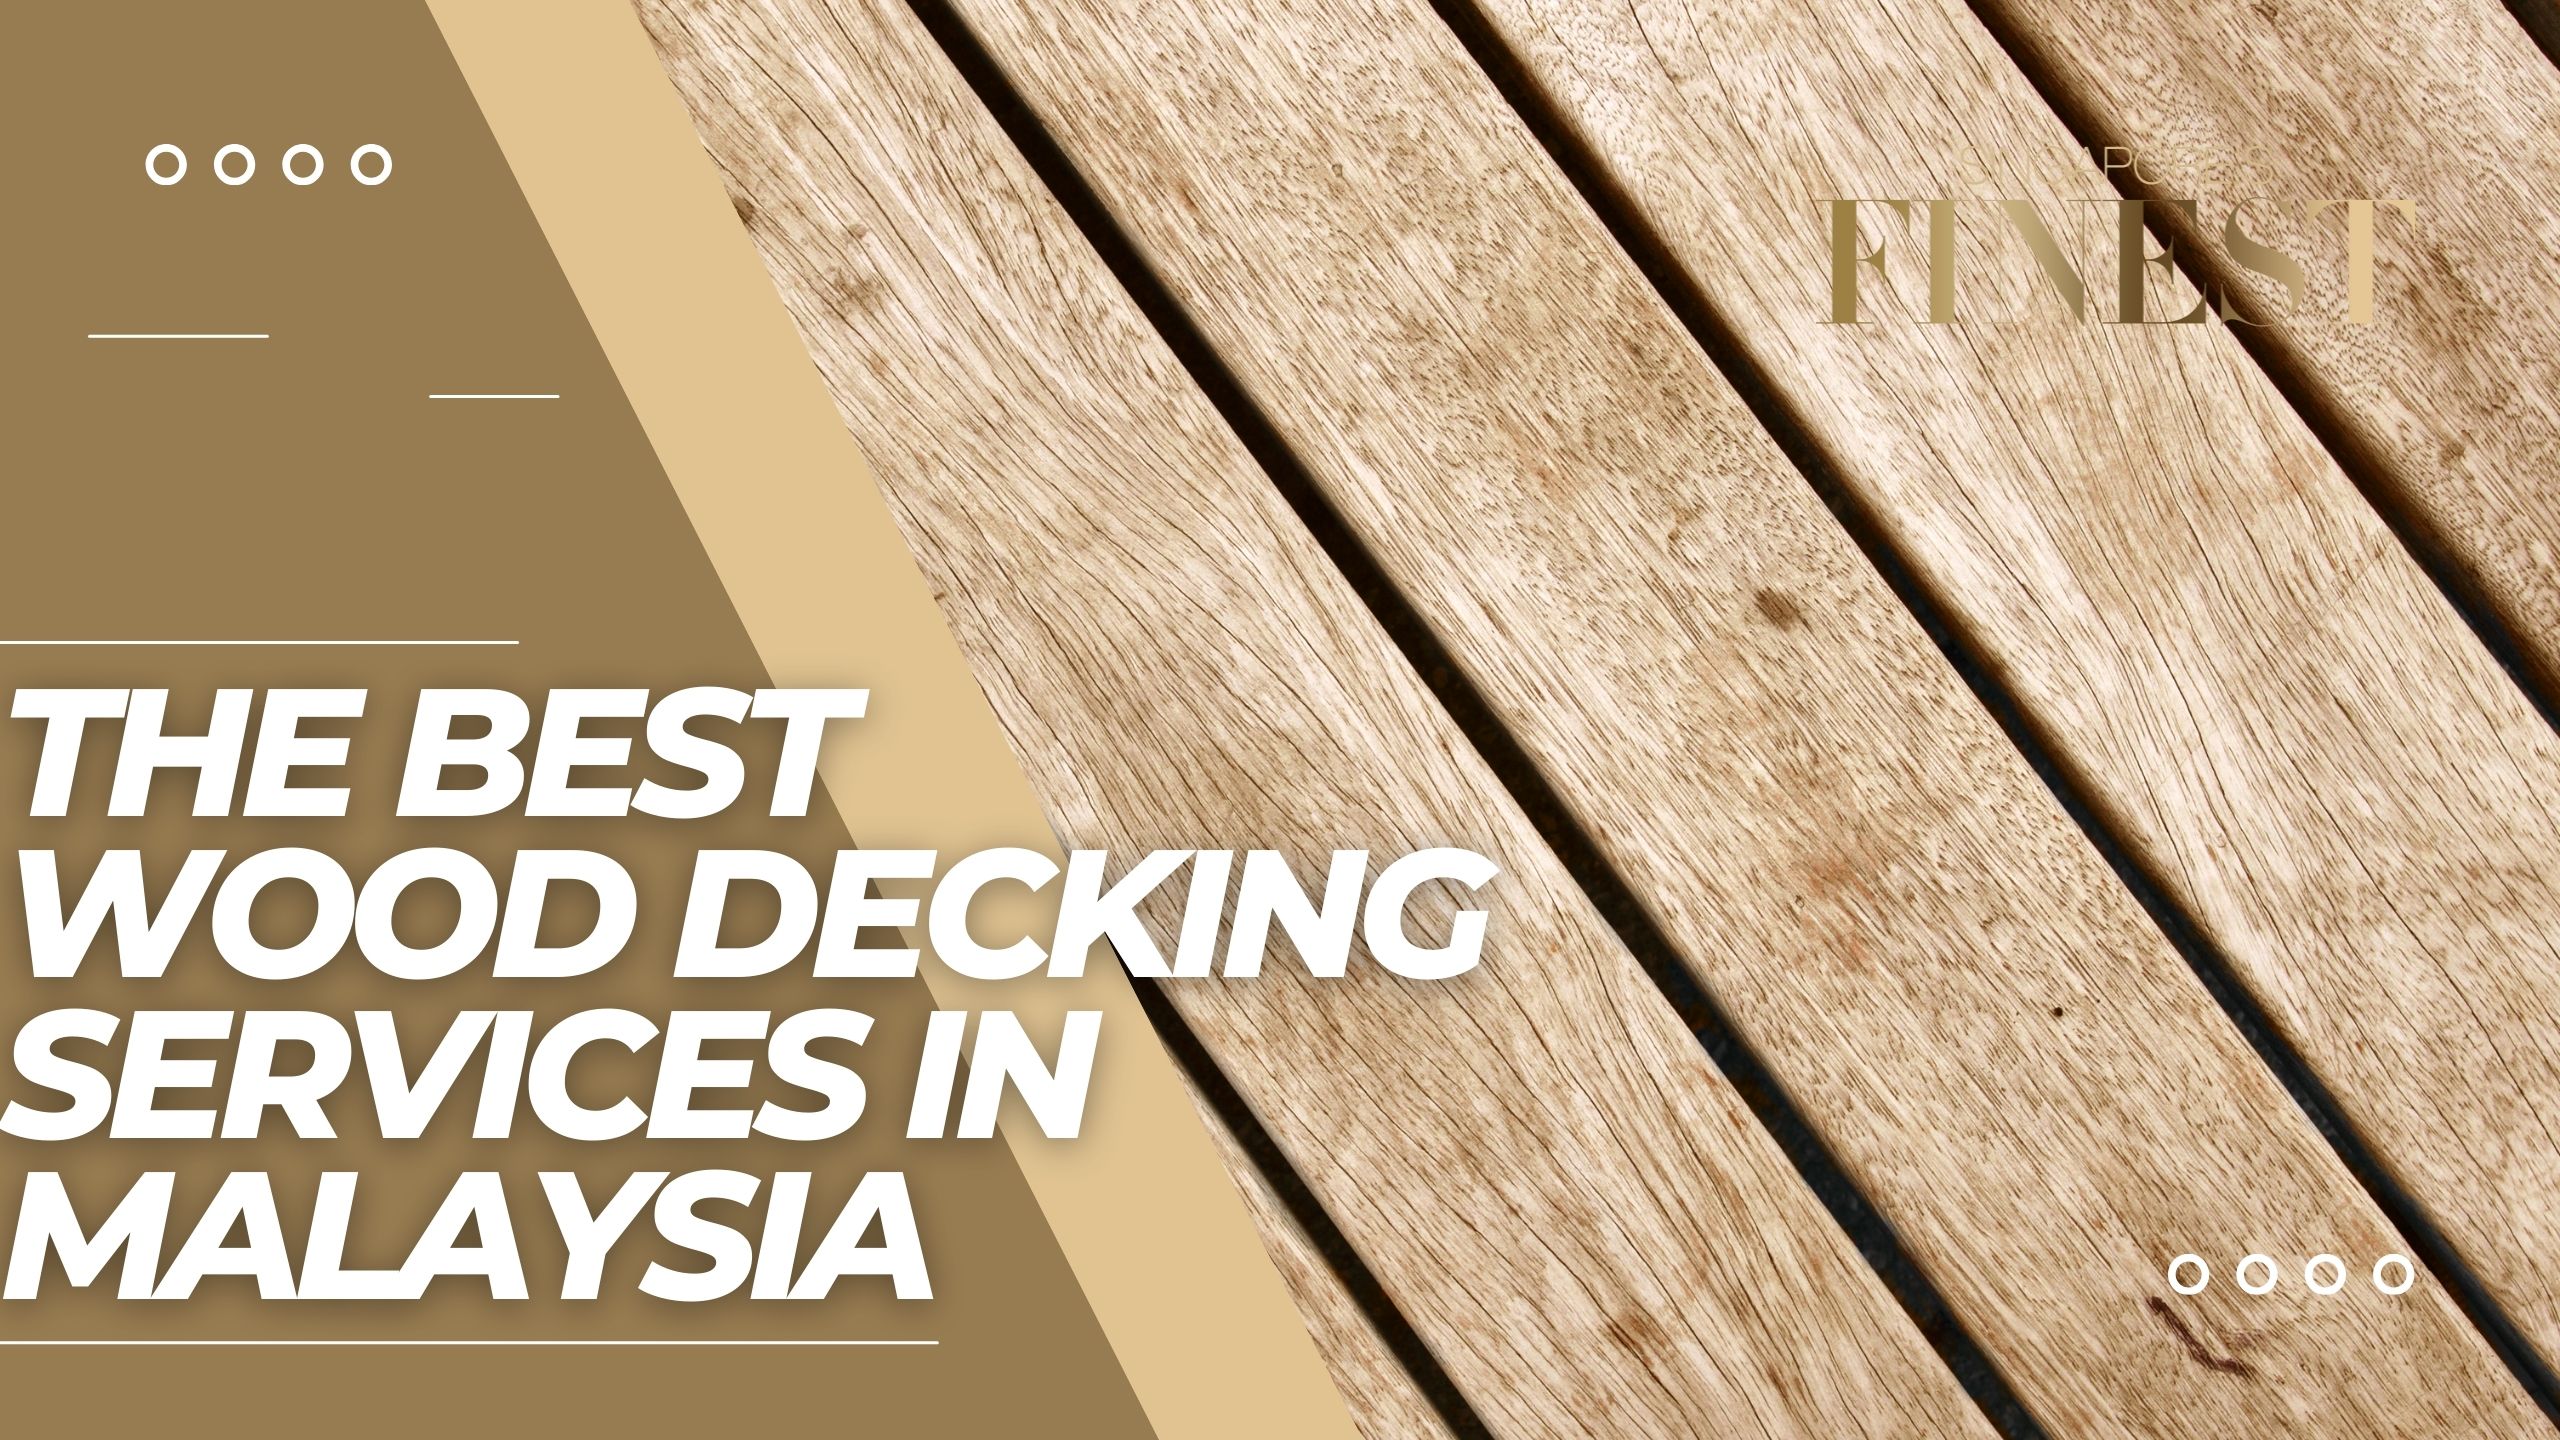 The Finest Wood Decking Services in Malaysia